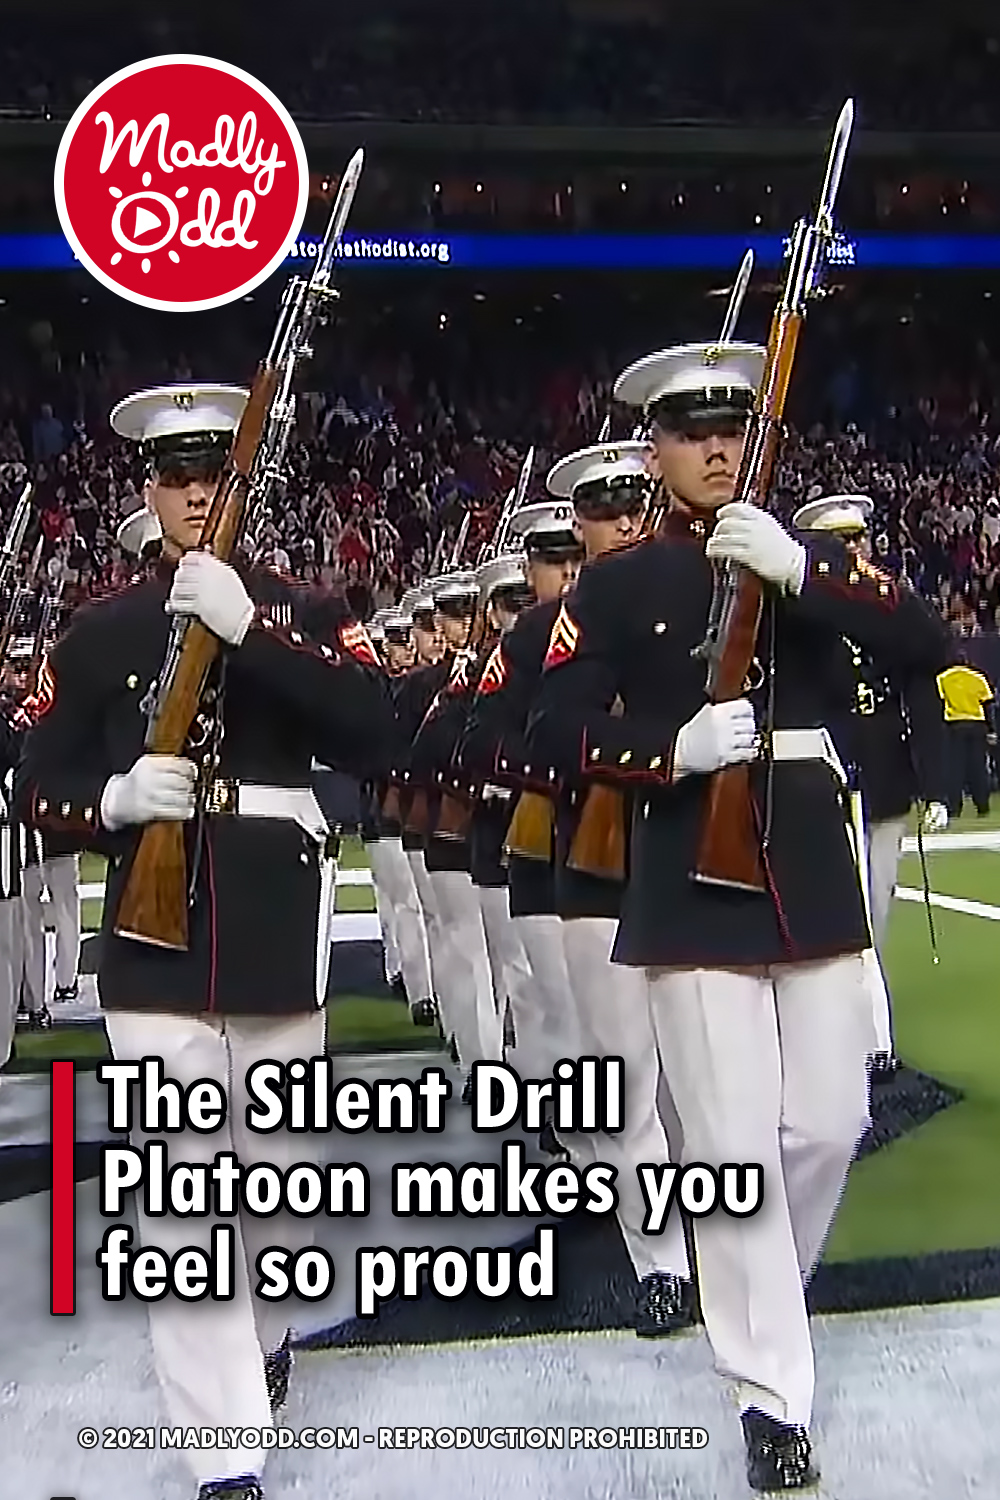 The Silent Drill Platoon makes you feel so proud